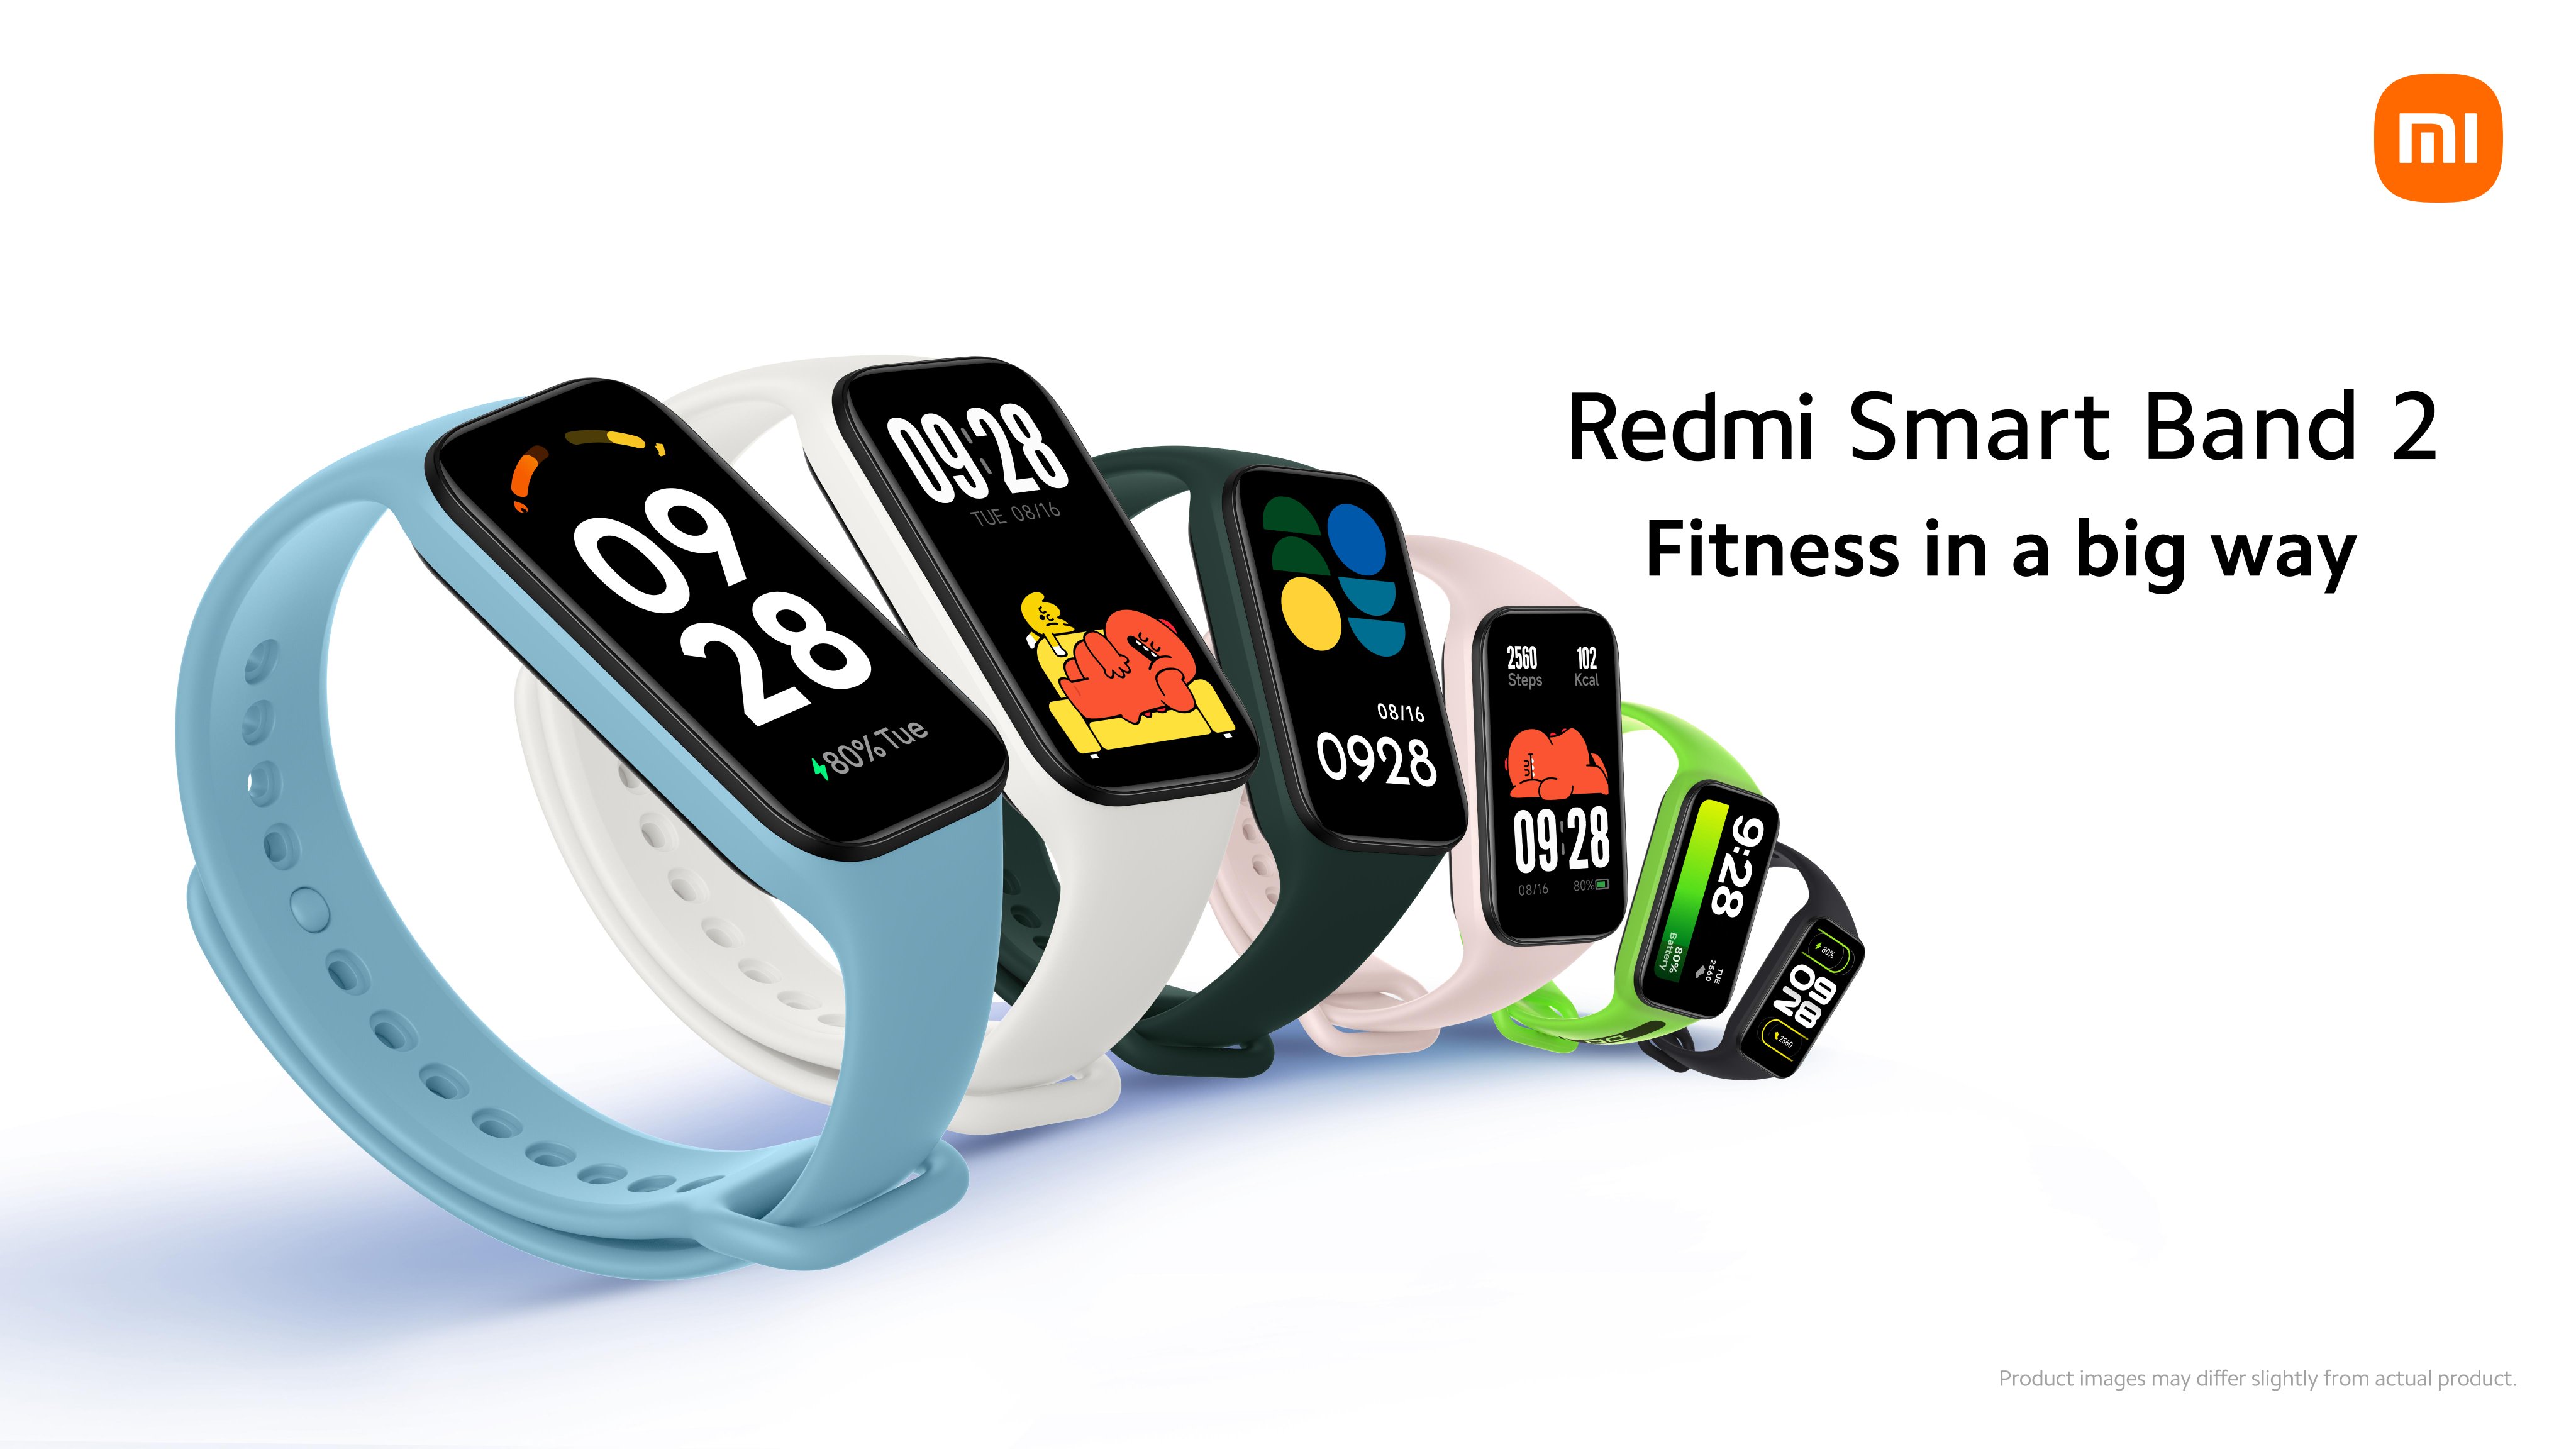 Redmi Smart Band 2 debuted globally: smart bracelet with AMOLED screen, heart rate monitor and up to 14-day battery life